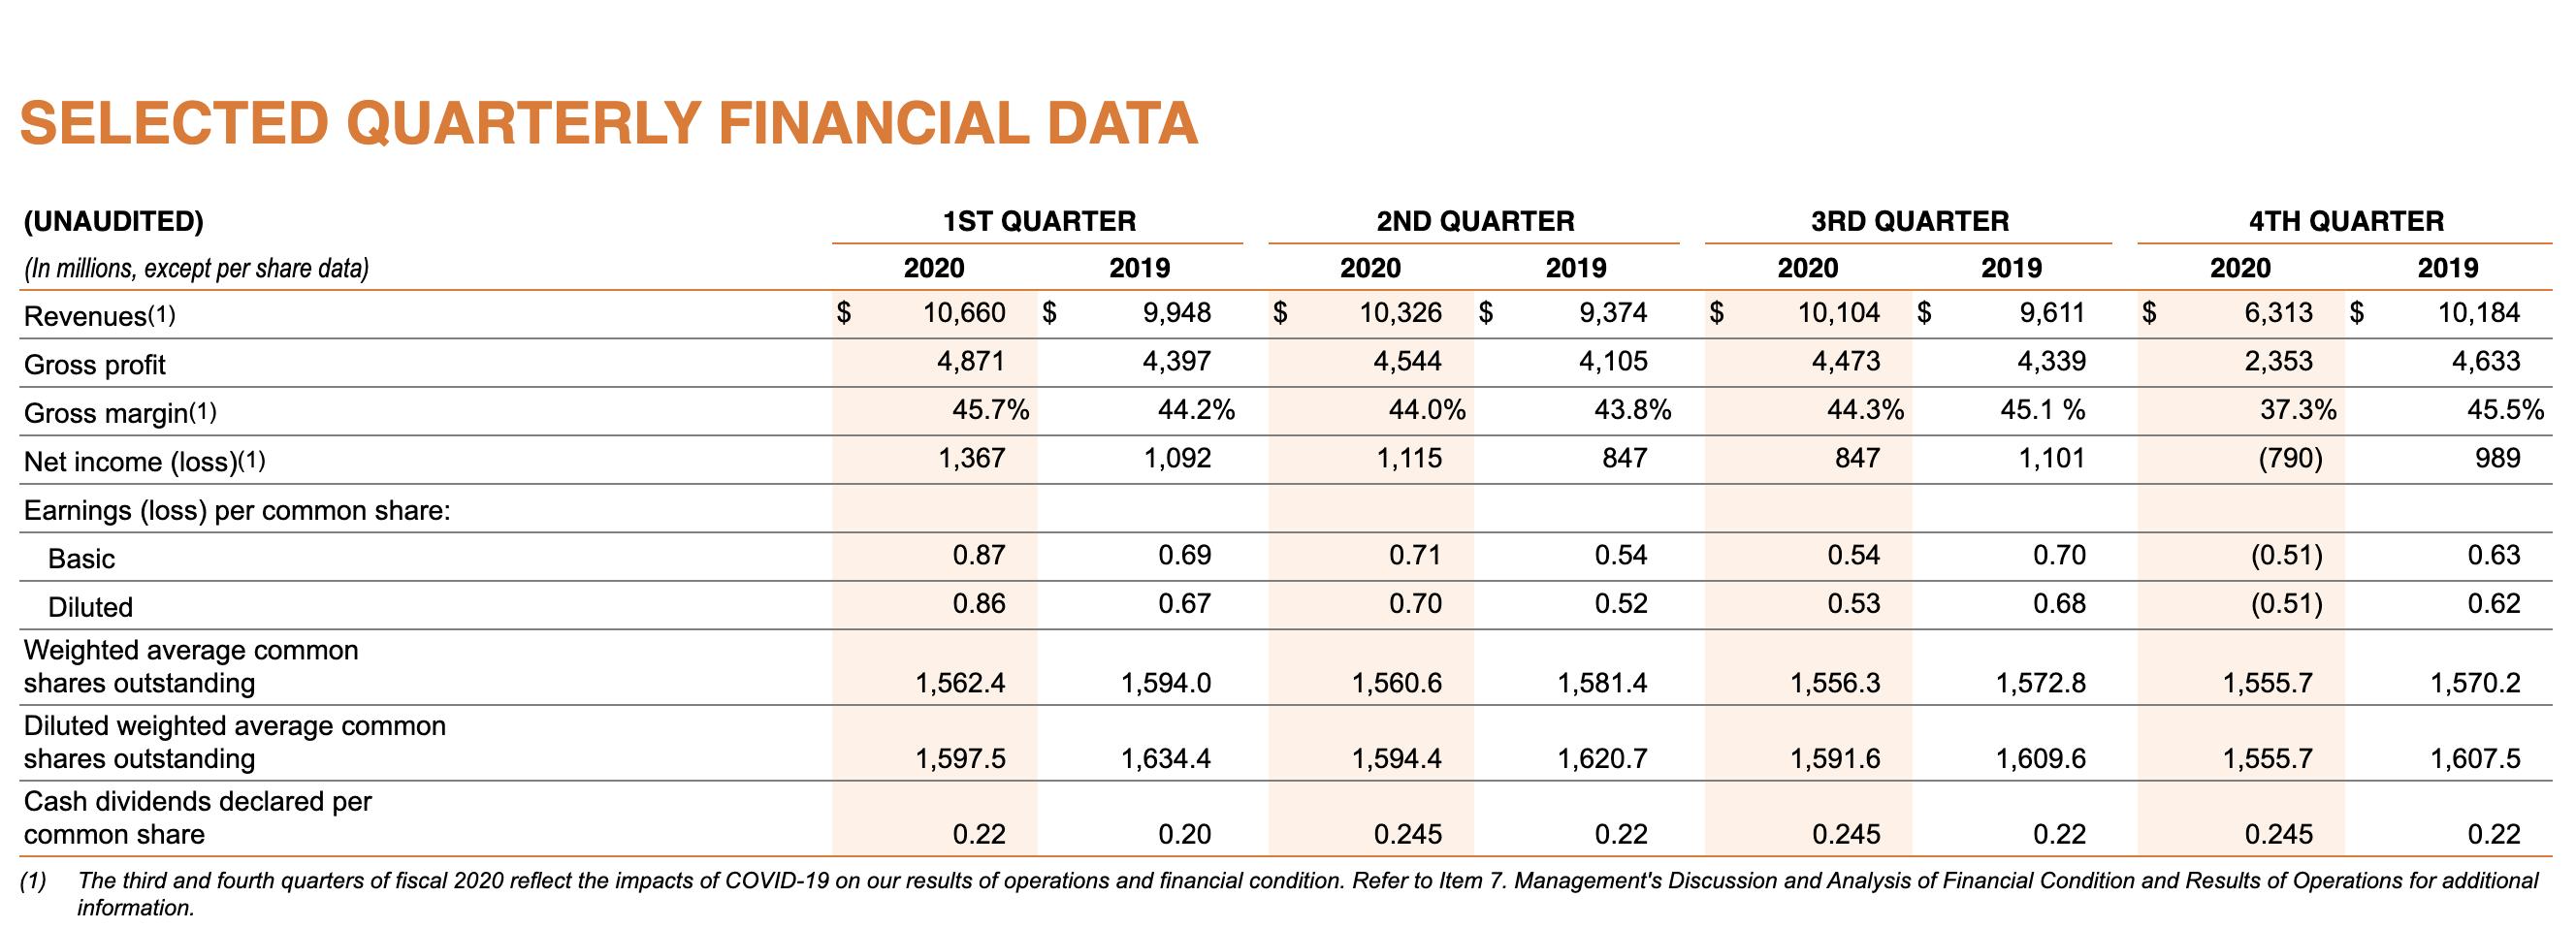 SELECTED QUARTERLY FINANCIAL DATA (UNAUDITED) 1ST QUARTER 2ND QUARTER 3RD QUARTER 4TH QUARTER (In millions, except per share